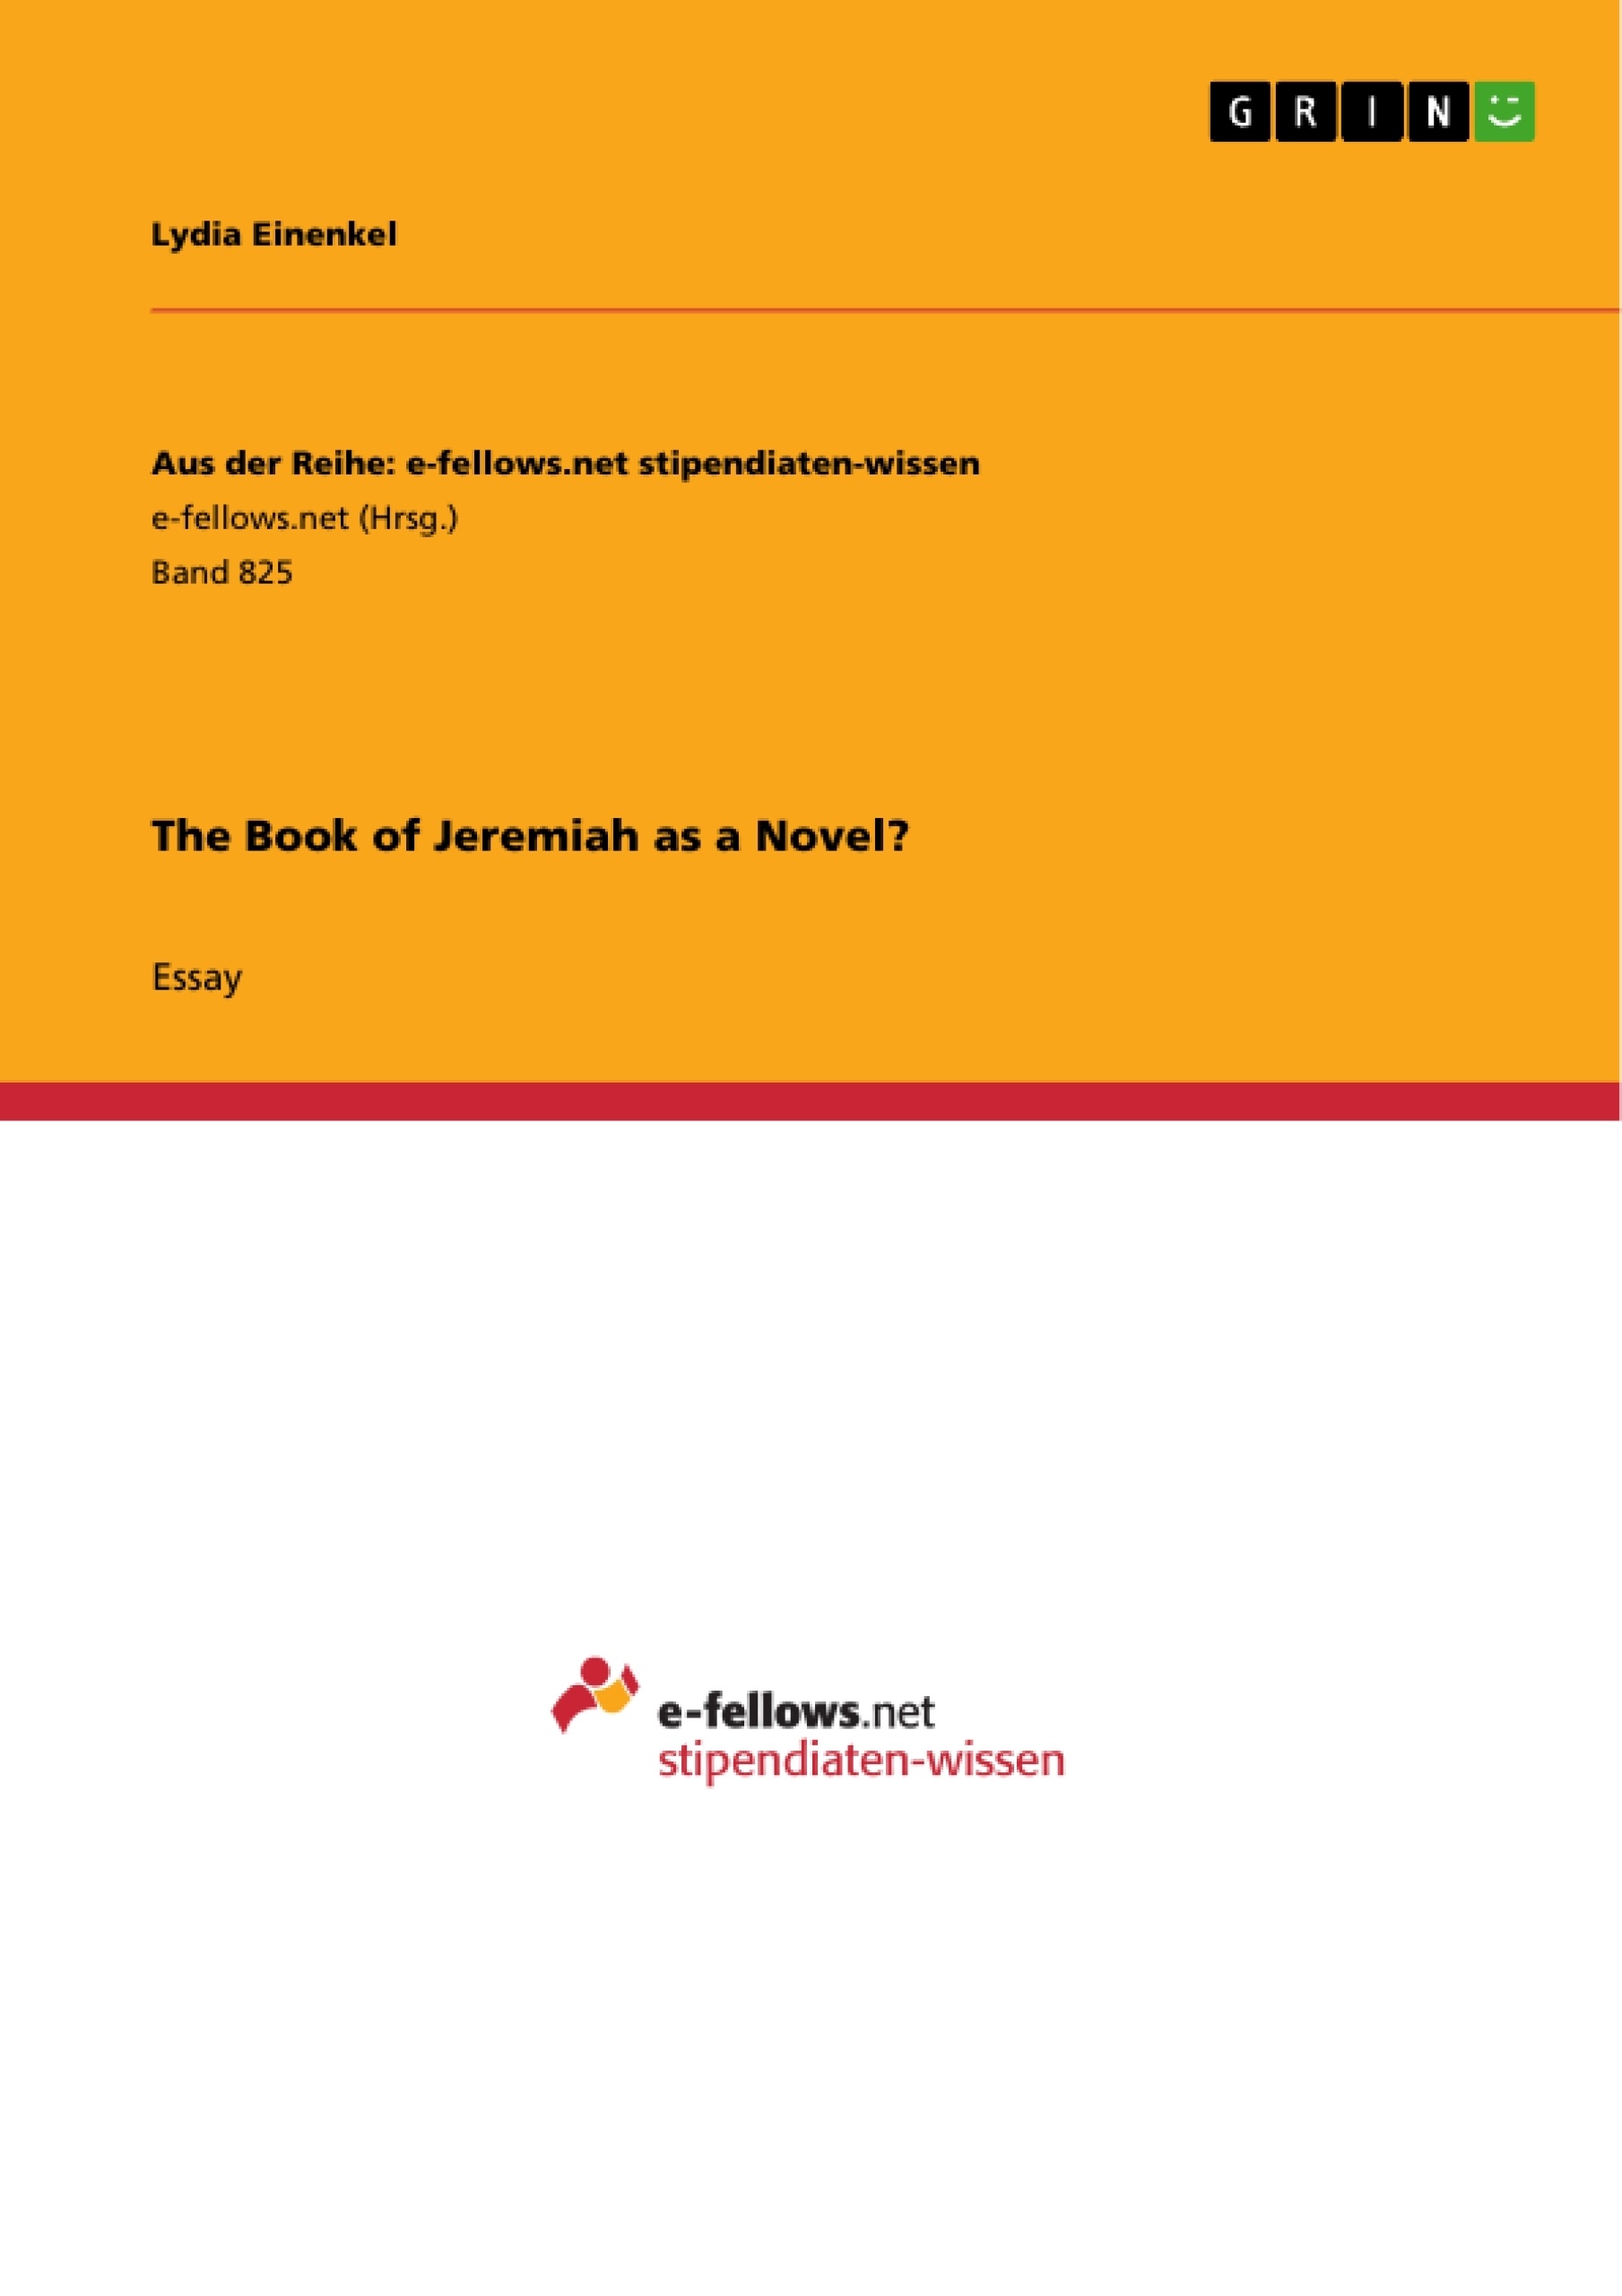 Title: The Book of Jeremiah as a Novel?